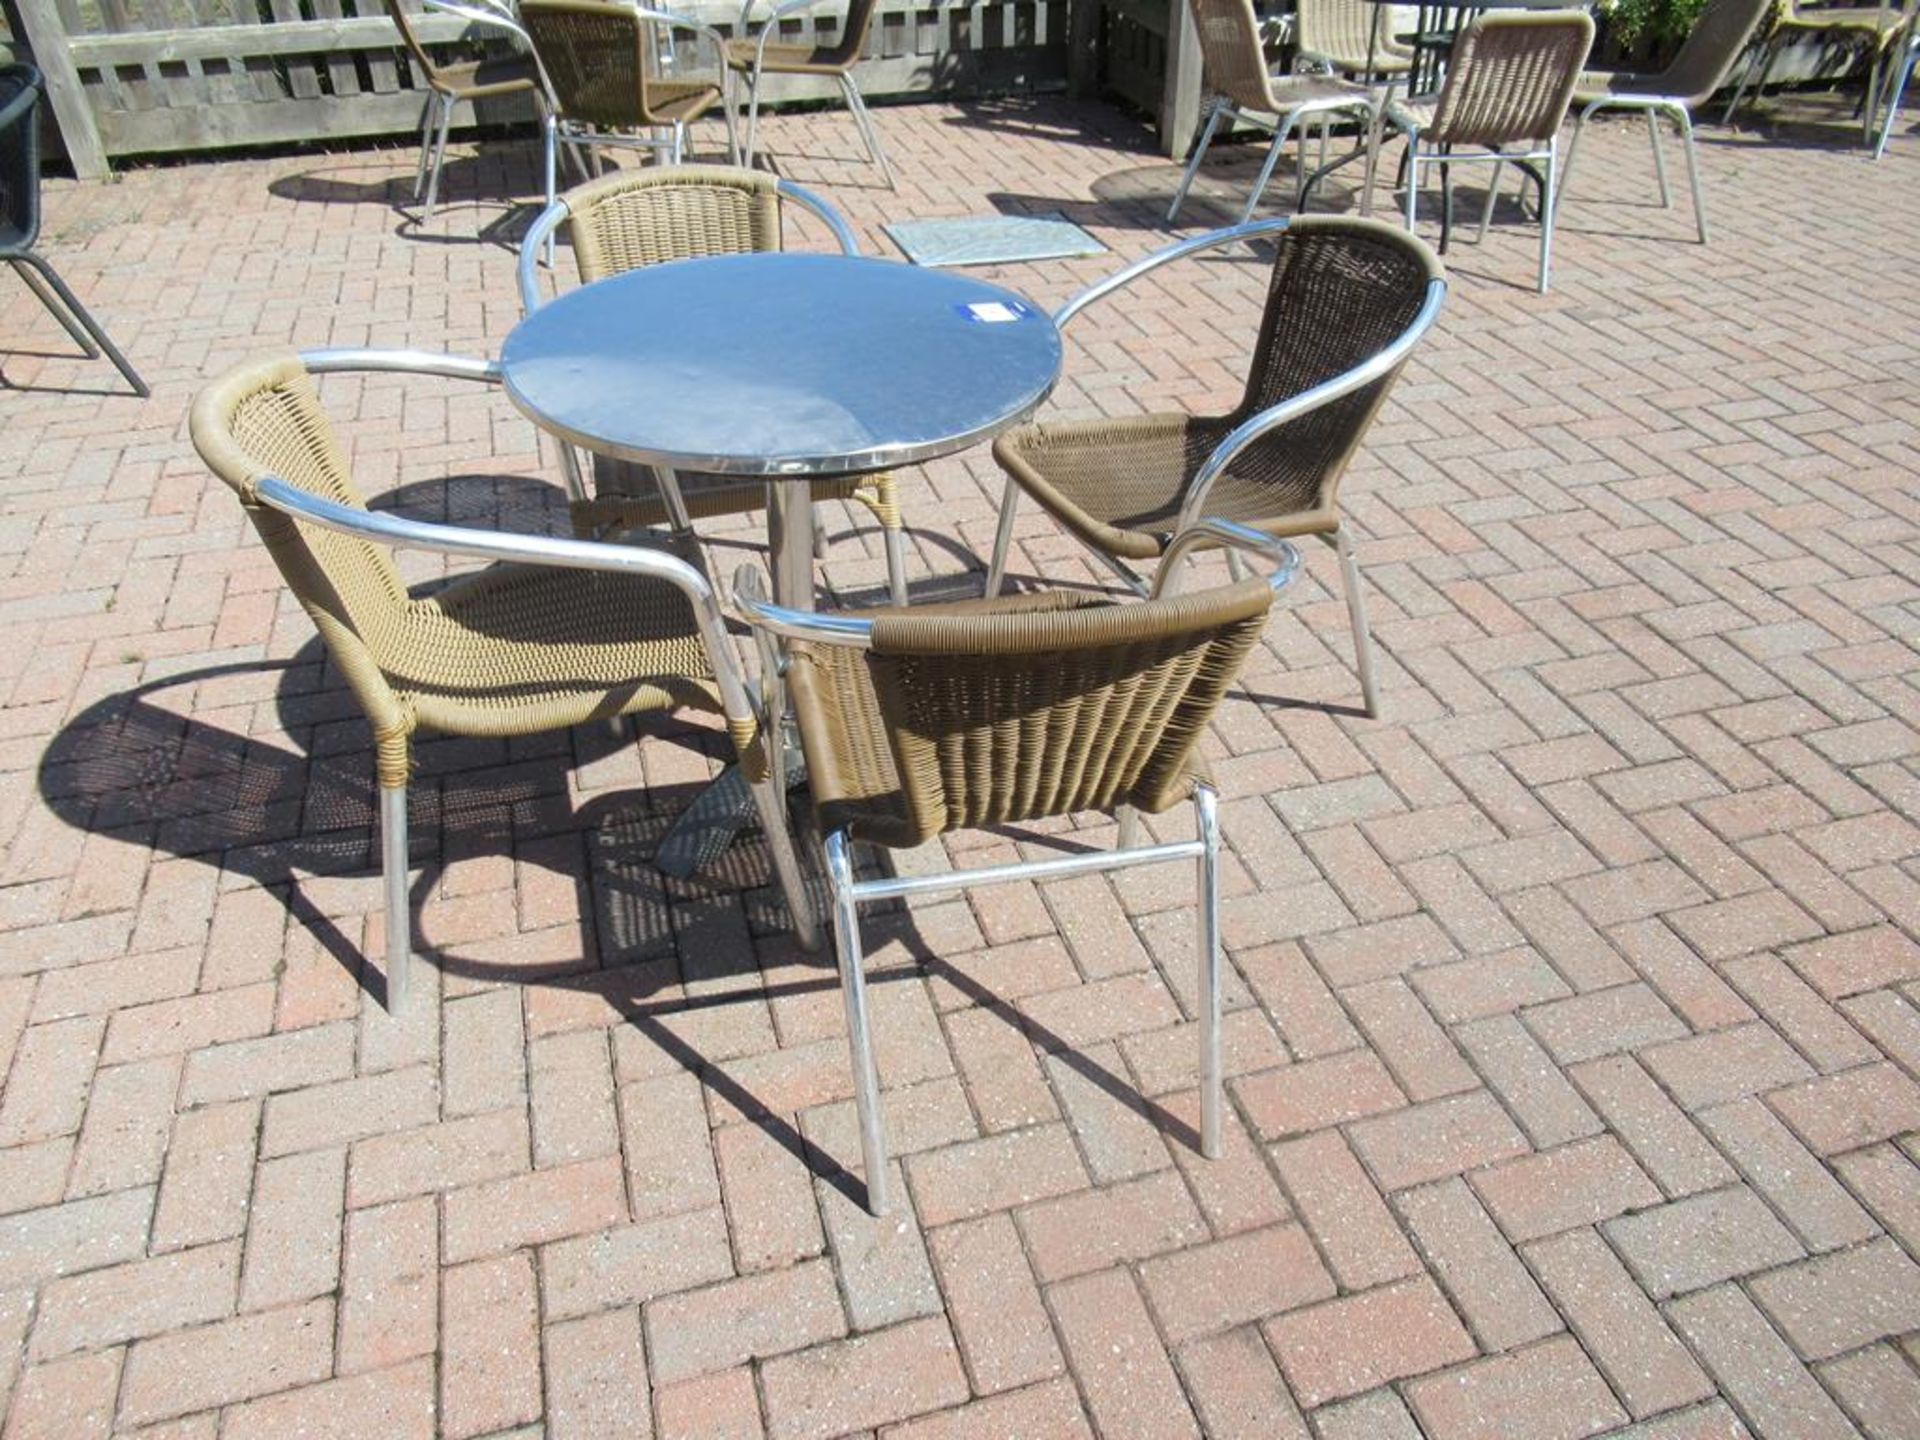 Metal Frame Circular Top Garden Table with 4 x Metal Framed Garden Chairs - Image 2 of 3